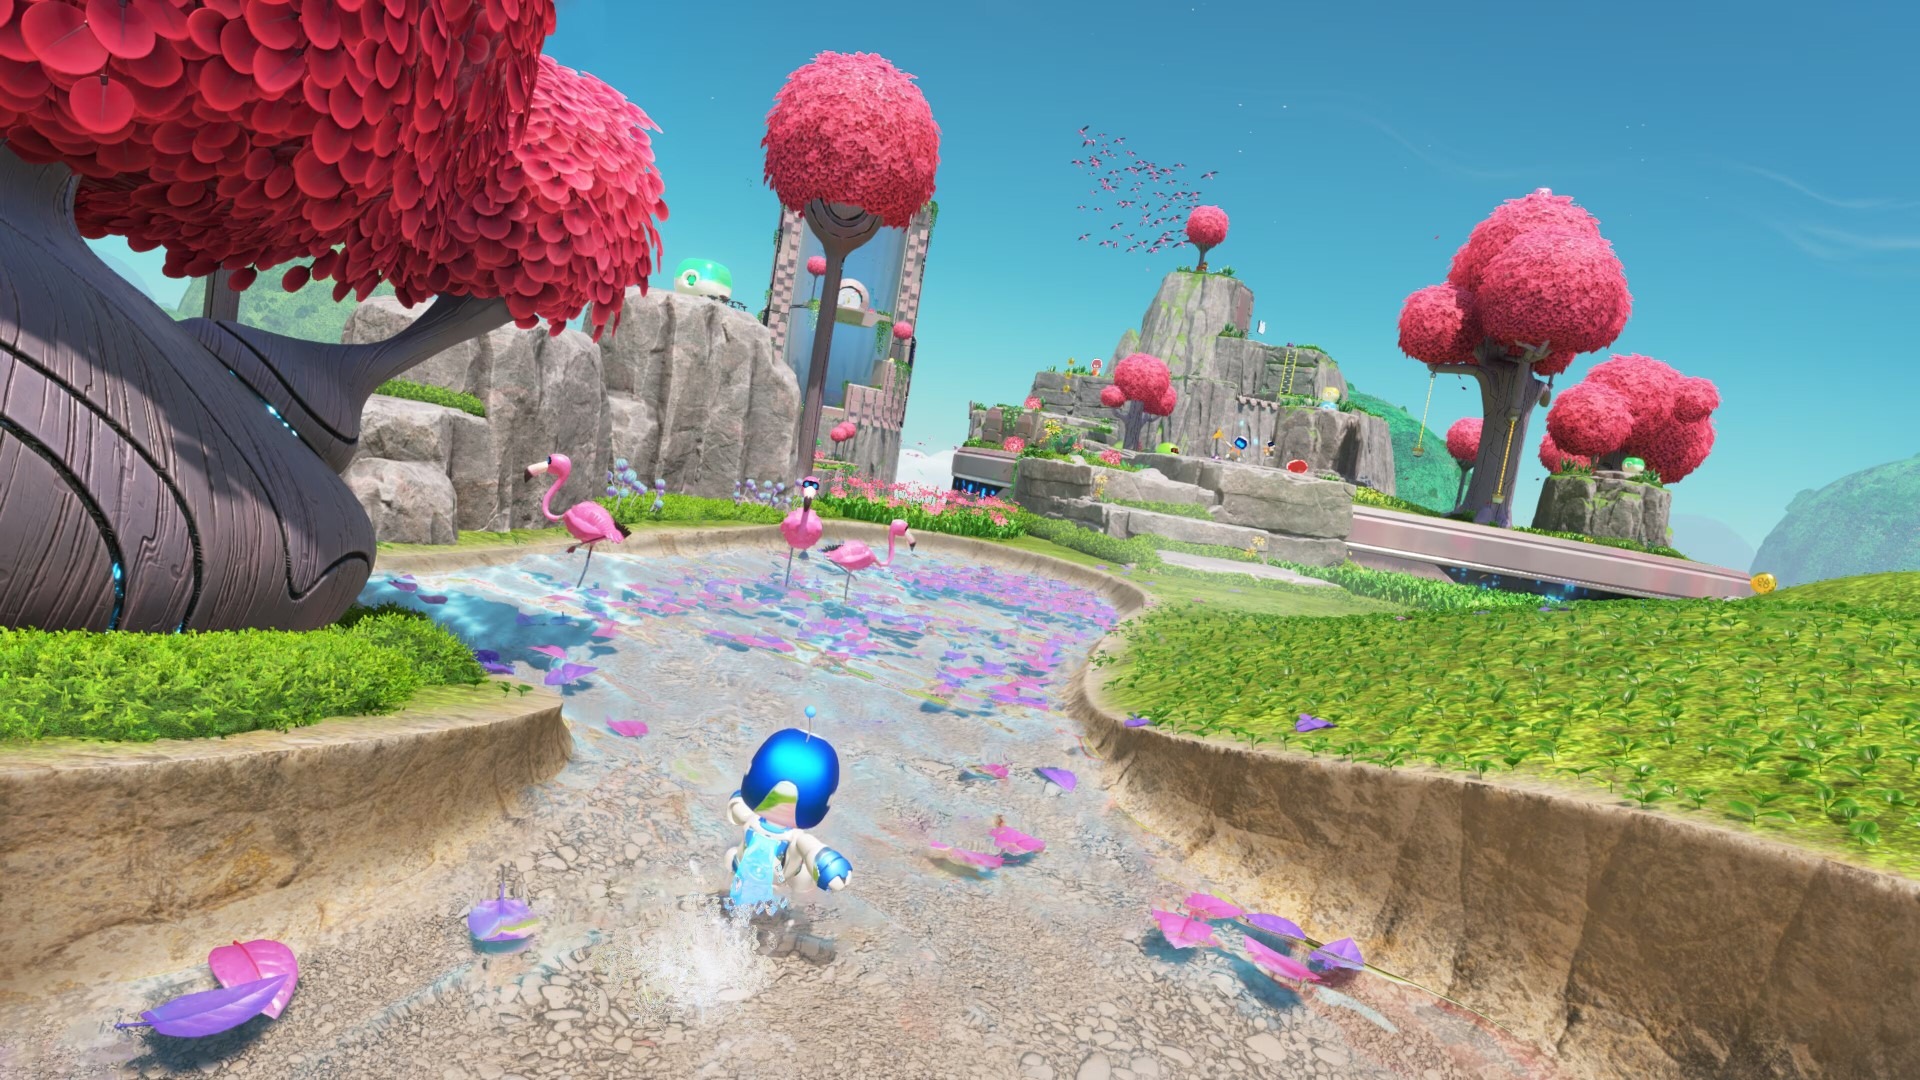 Astro Bot’s New Game First Thinked As Open World